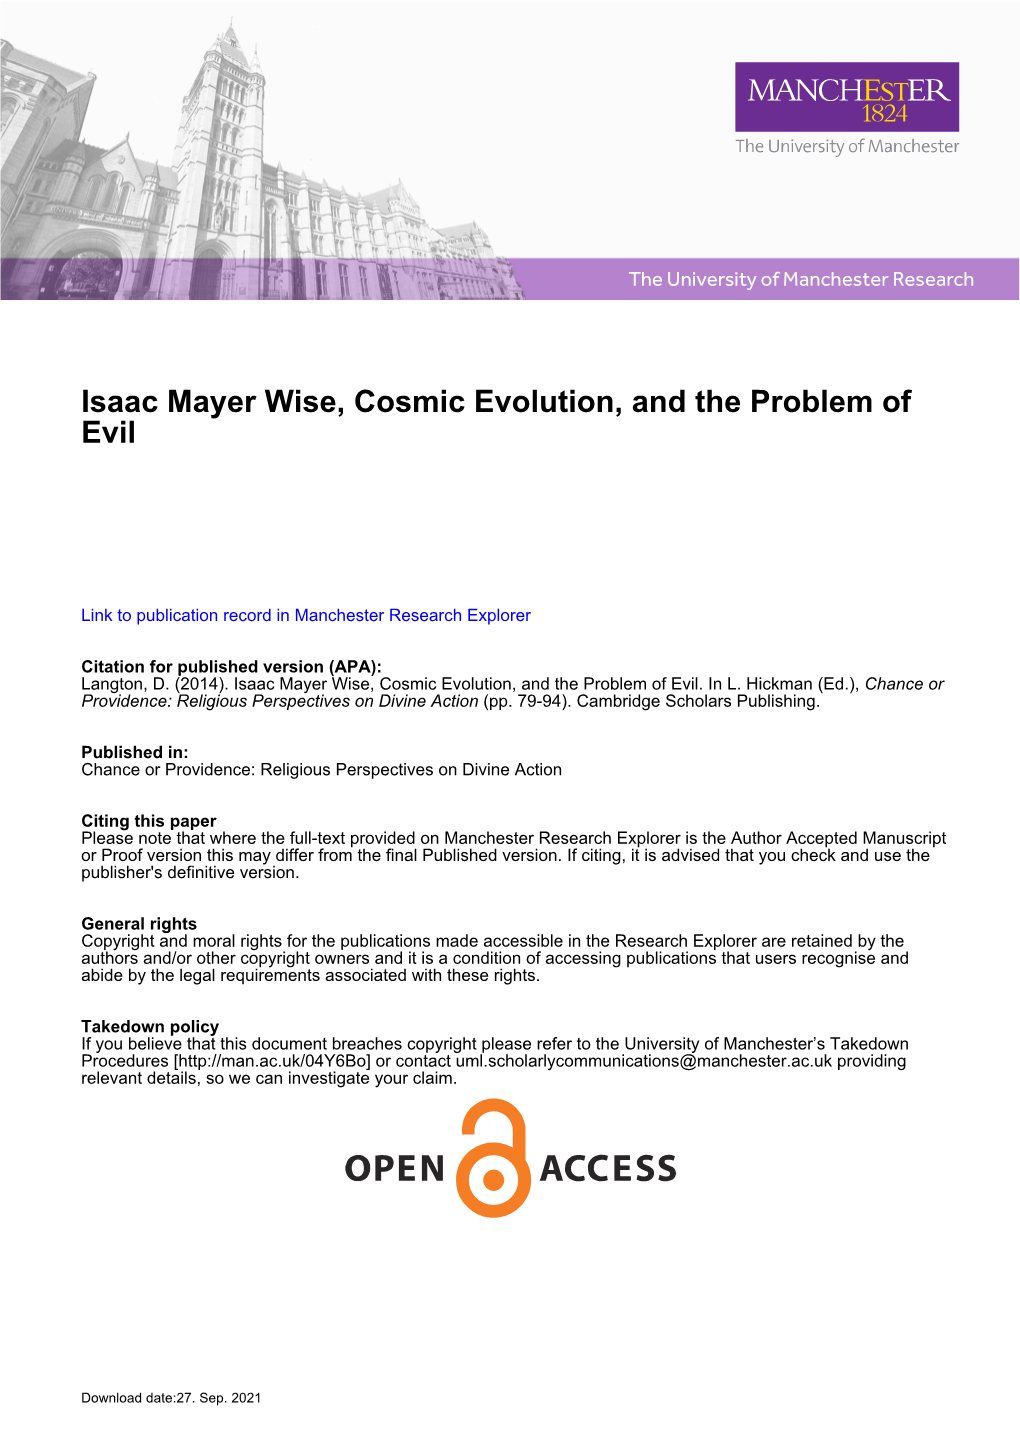 Isaac Mayer Wise, Cosmic Evolution, and the Problem of Evil